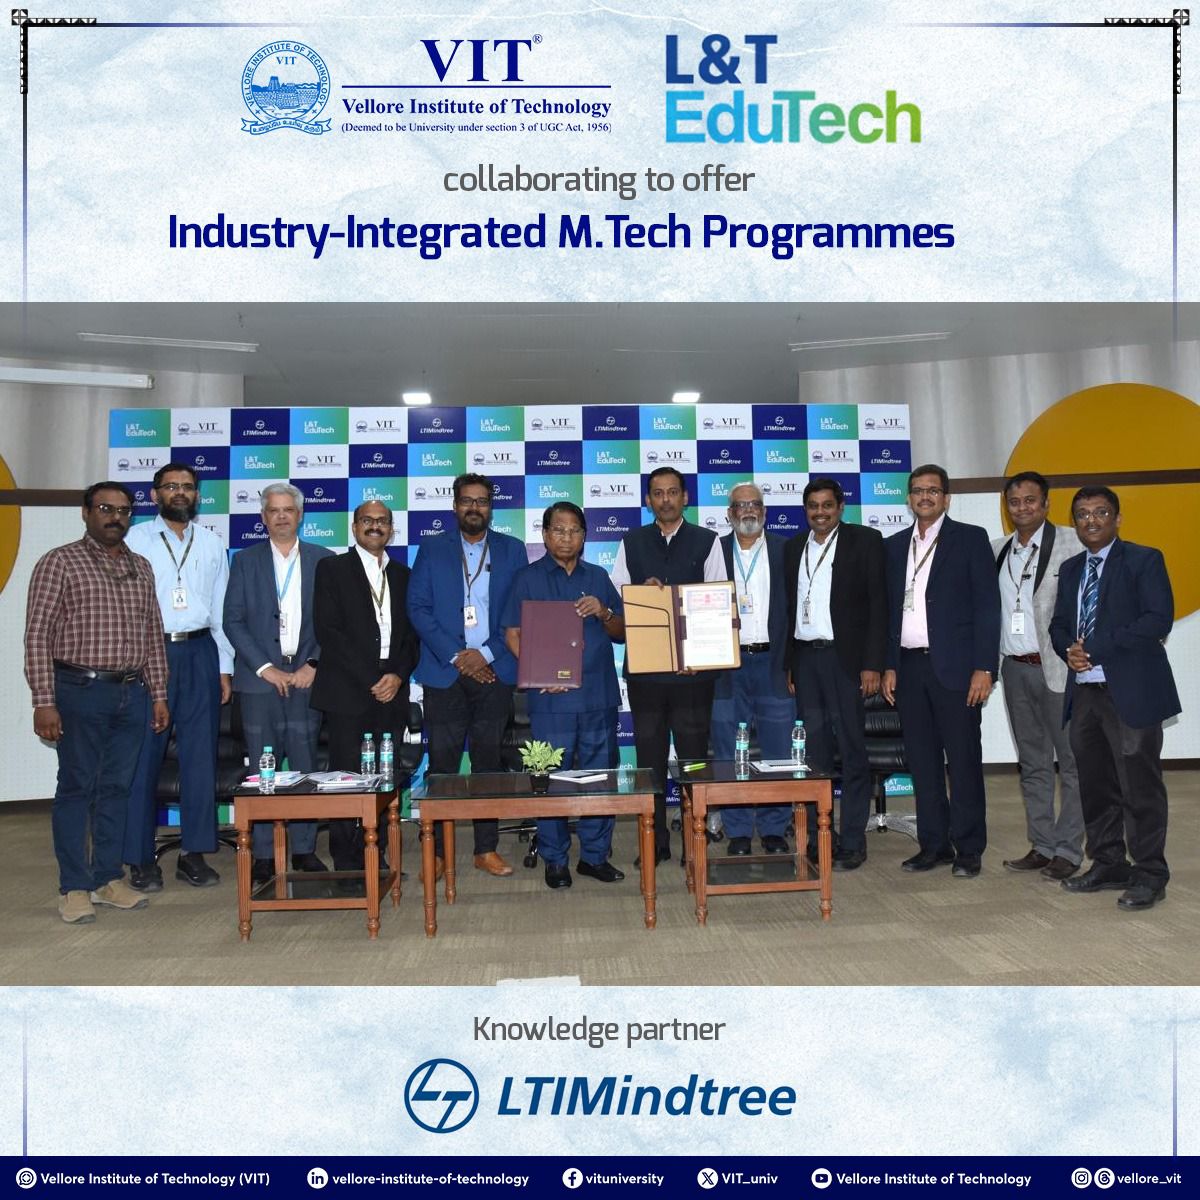 L&T Edutech and VIT signed MoU to offer Industry Integrated M.Tech programmes in knowledge partnership with LTI Mindtree. #VIT #LarsenandToubro #LTIMindtree #MTechPrograms #IntegratedMTech #ArtificialIntelligence #MachineLearning #DataScience